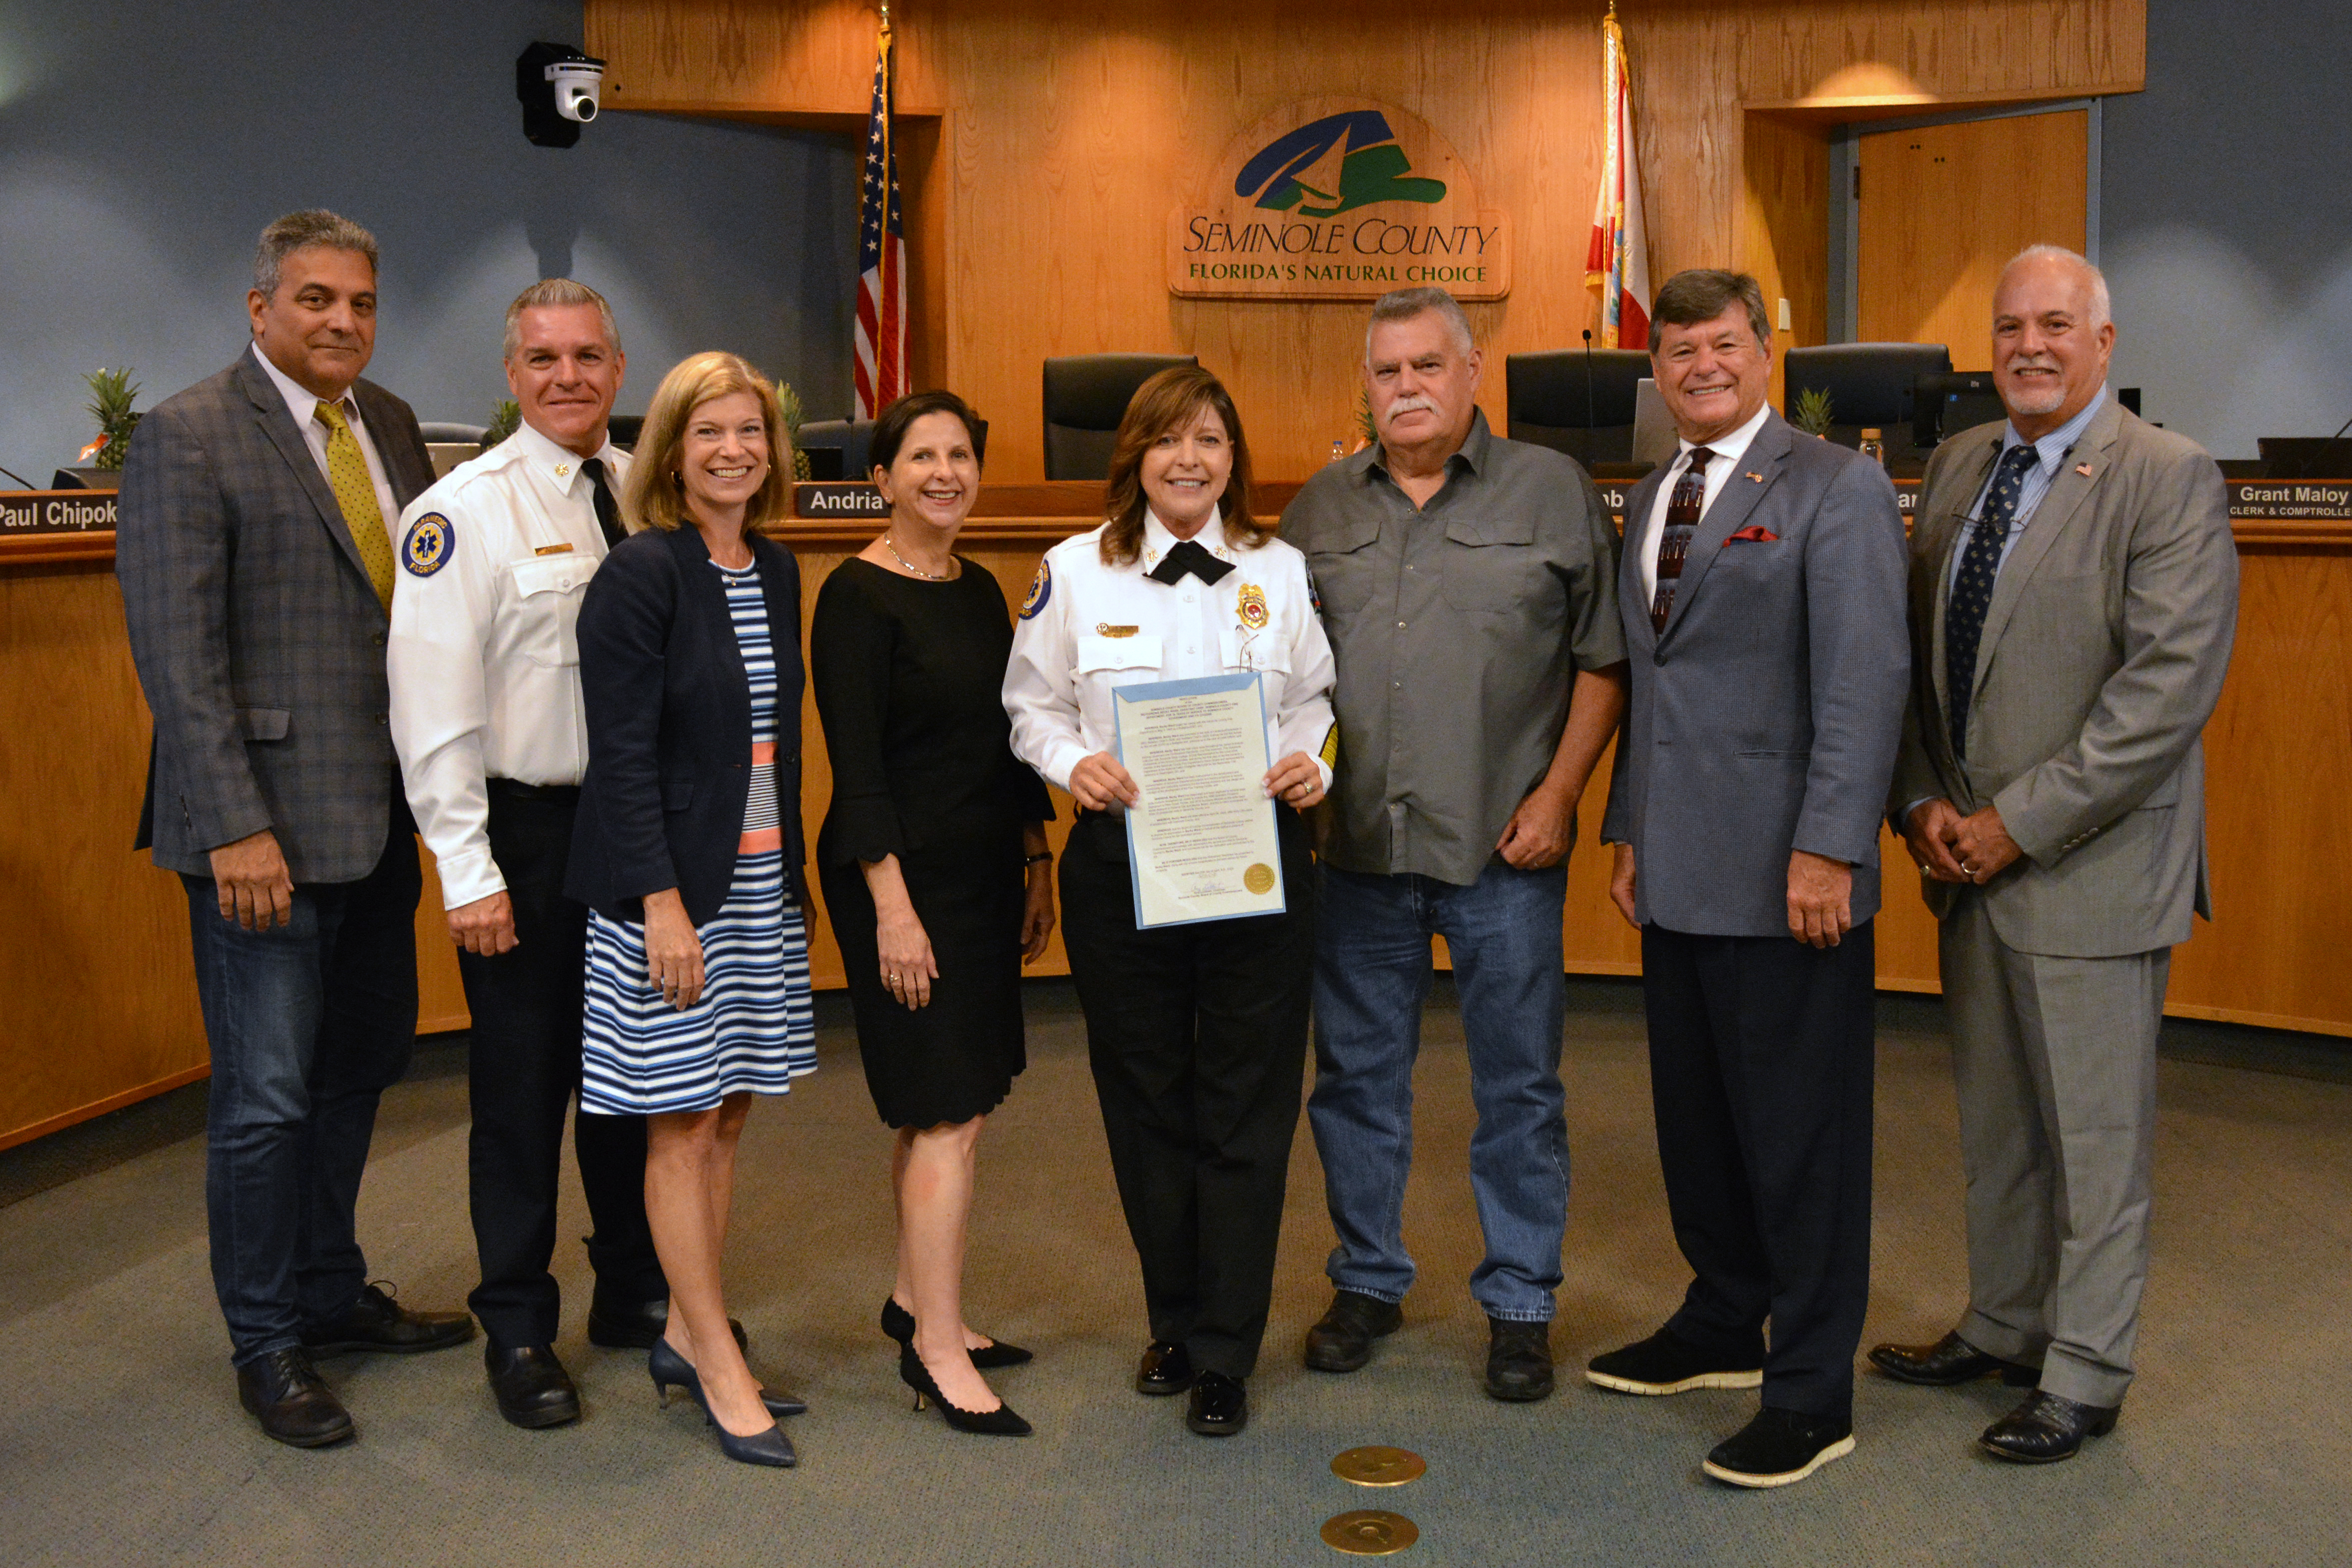 Recognizing Becky Ward, Assistant Chief, Seminole County Fire Department upon her retirement for 30 years of service to Seminole County Government and its citizens. 